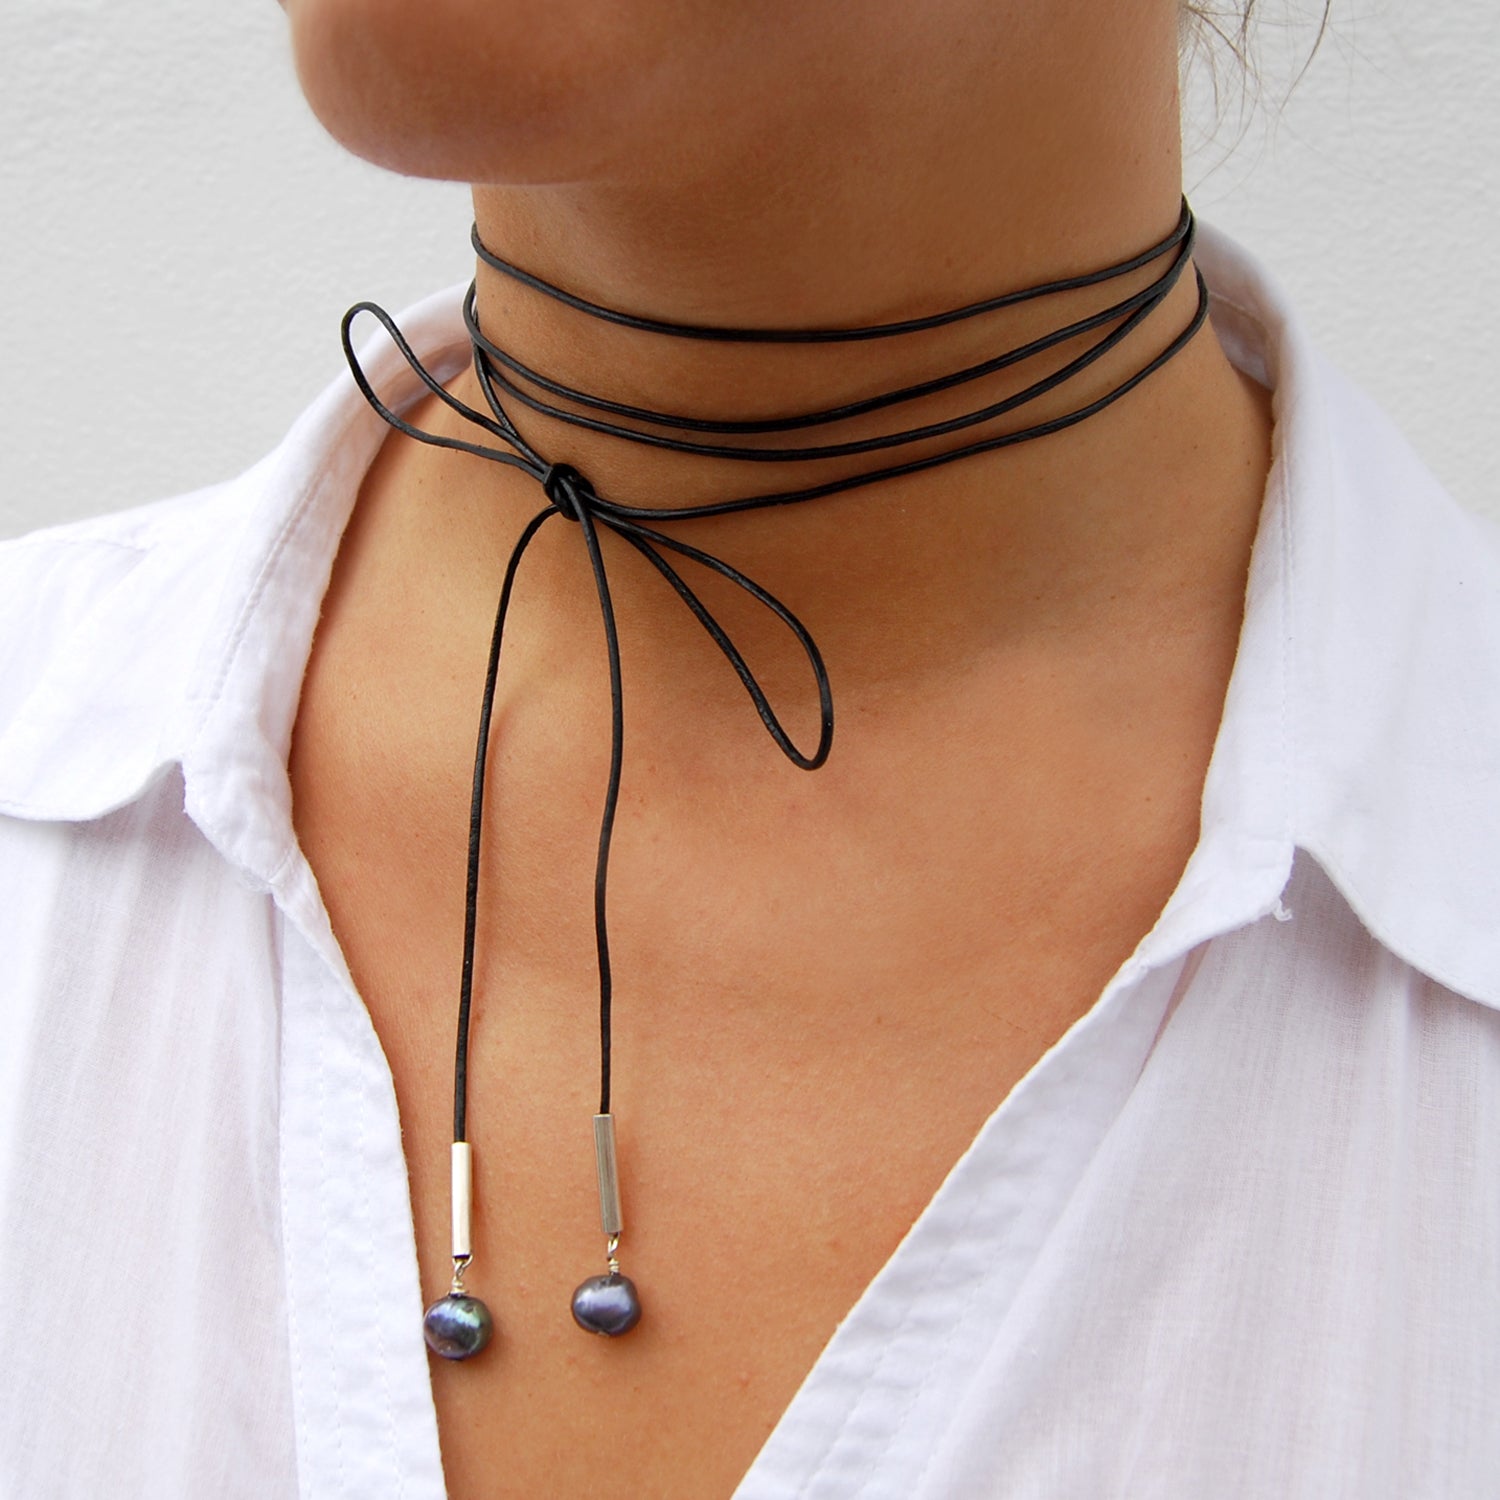 Single Ring -n- Spikes Choker - Unapologetically Punk Rock